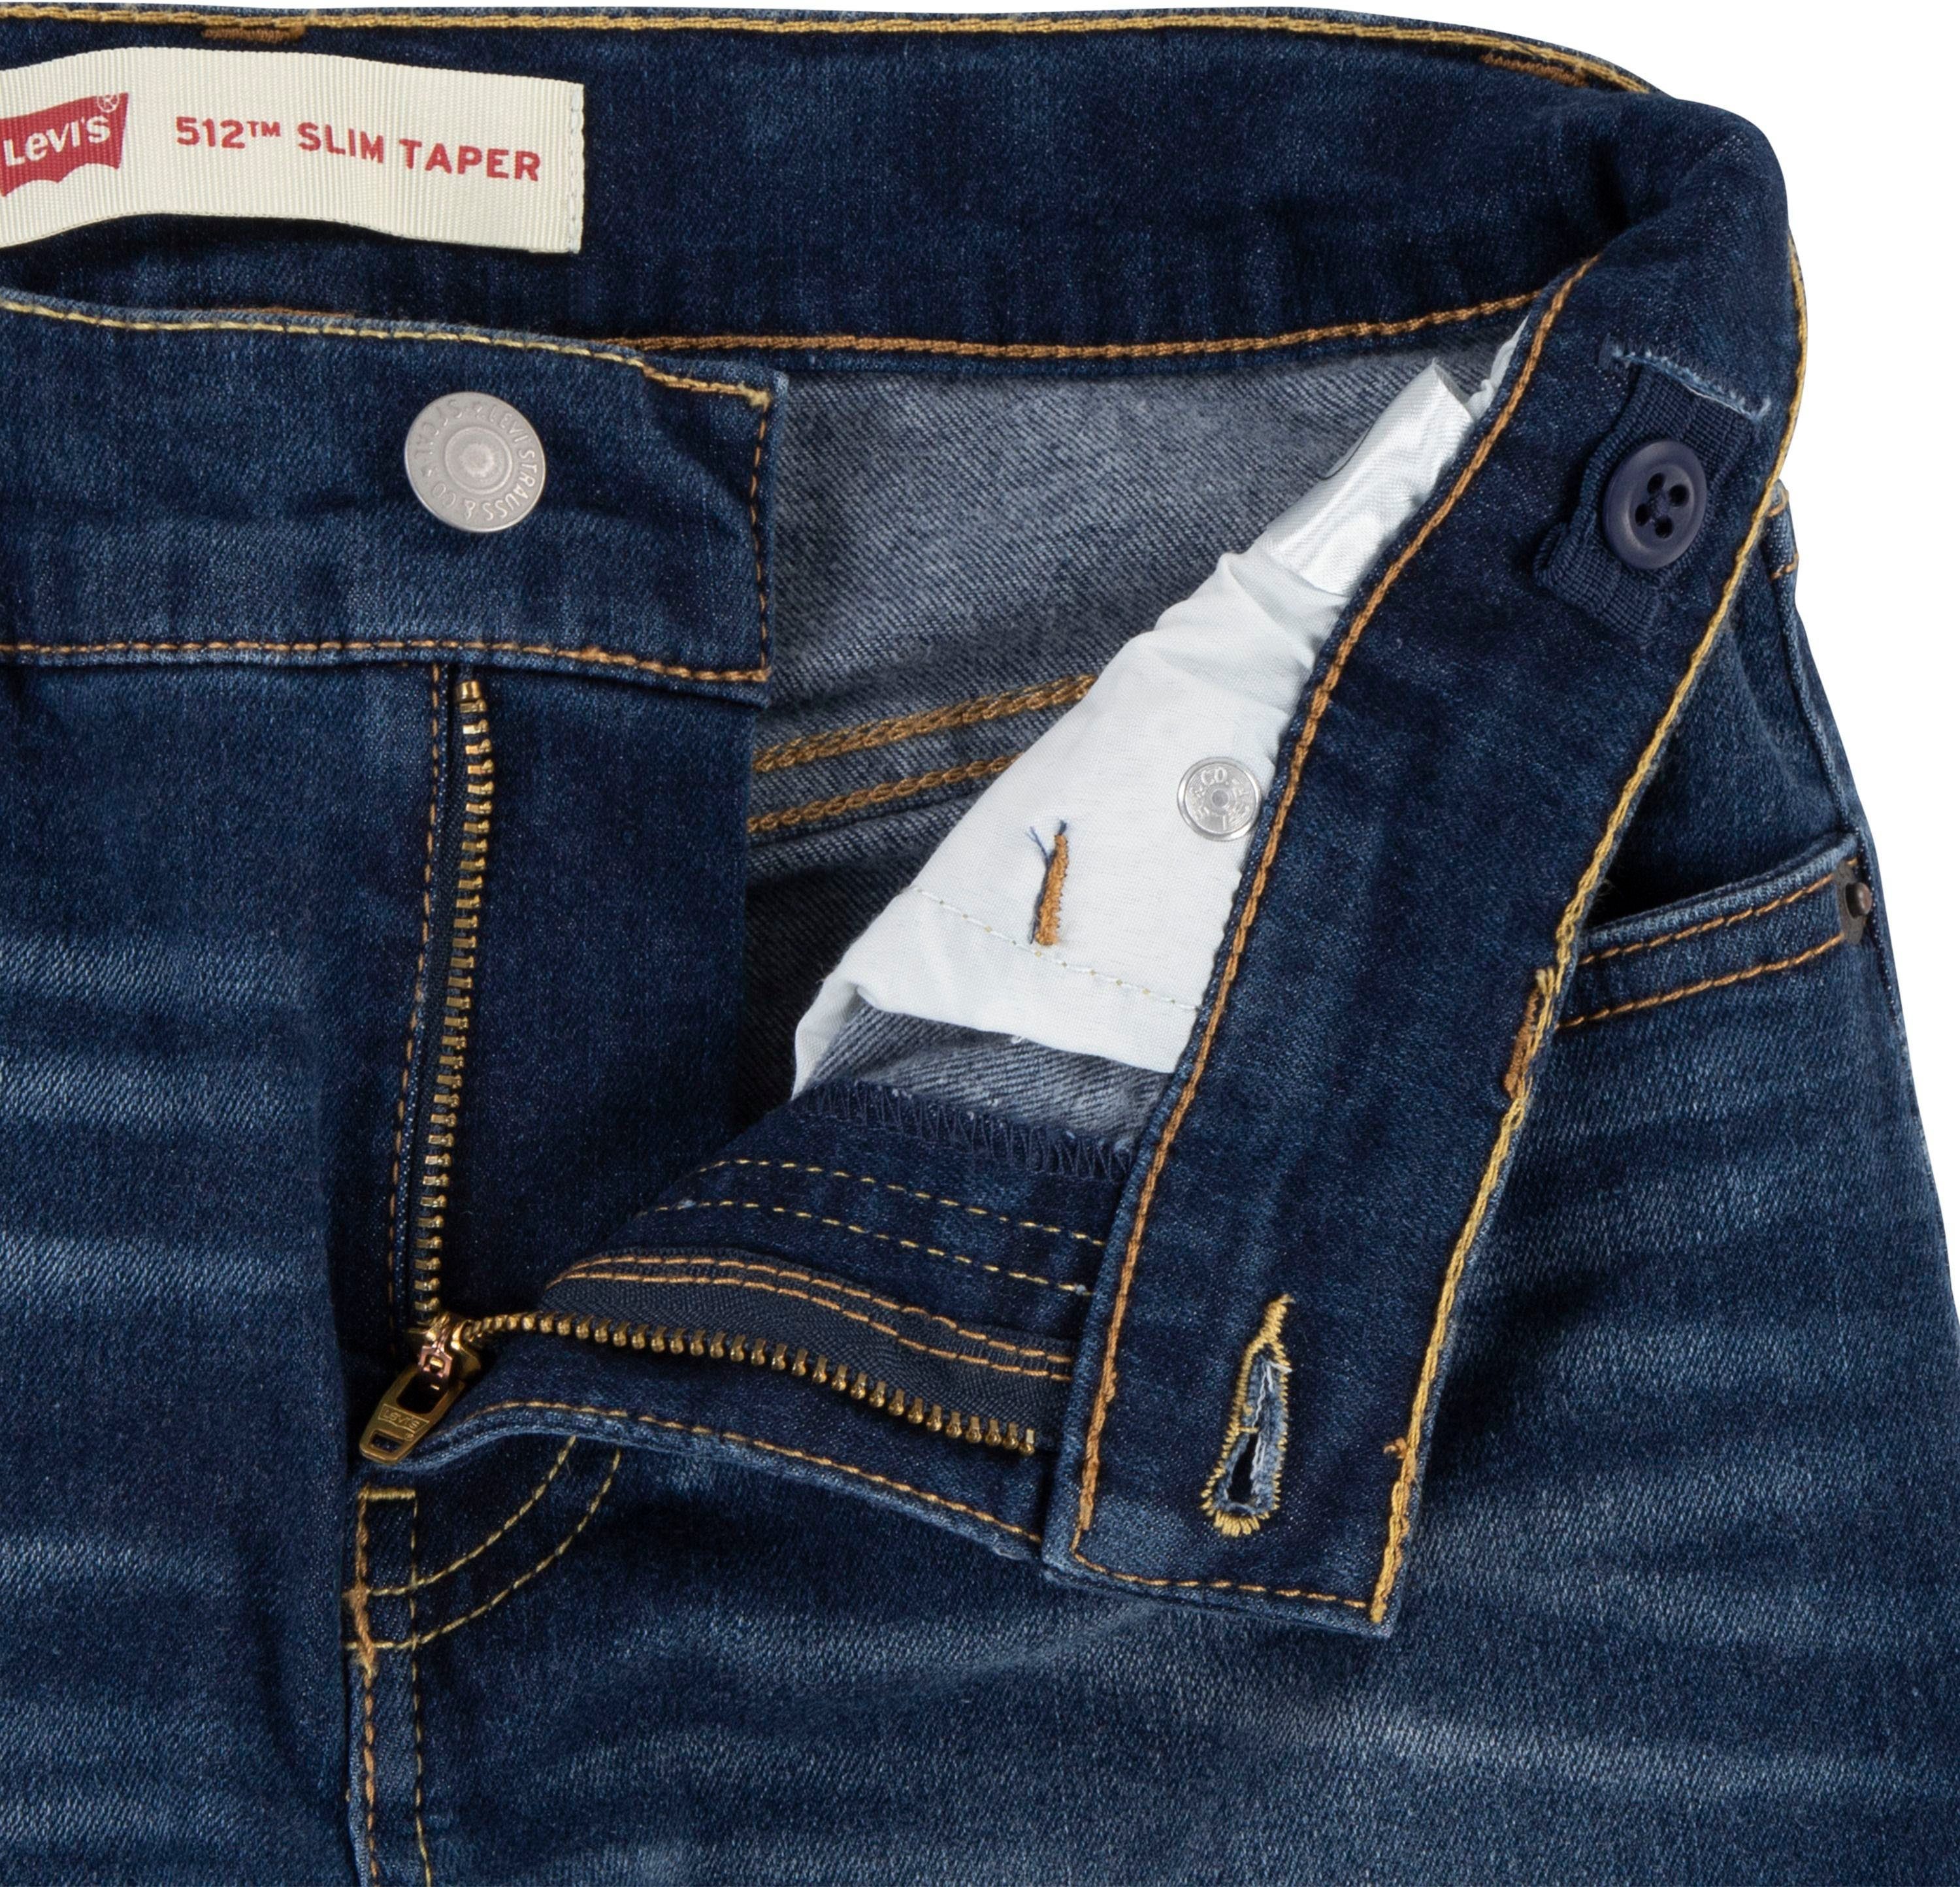 Stretch-Jeans BOYS 512 STRONG garland PERFORMANCE Levi's® for Kids